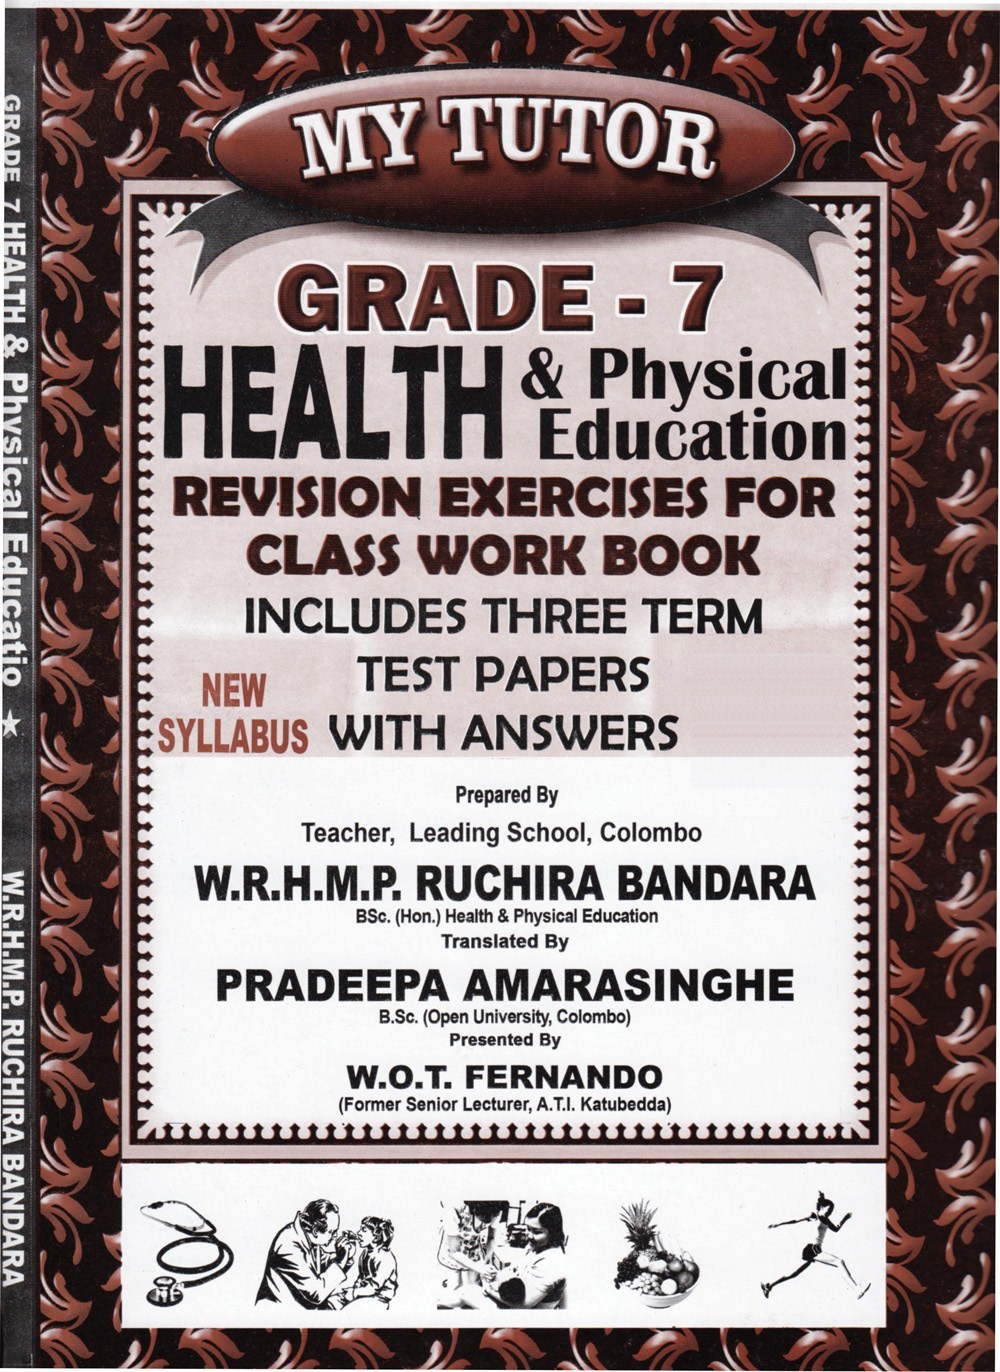 My Tutor Health and Physical Education Revision Exercises For Class Work Book Grde 7